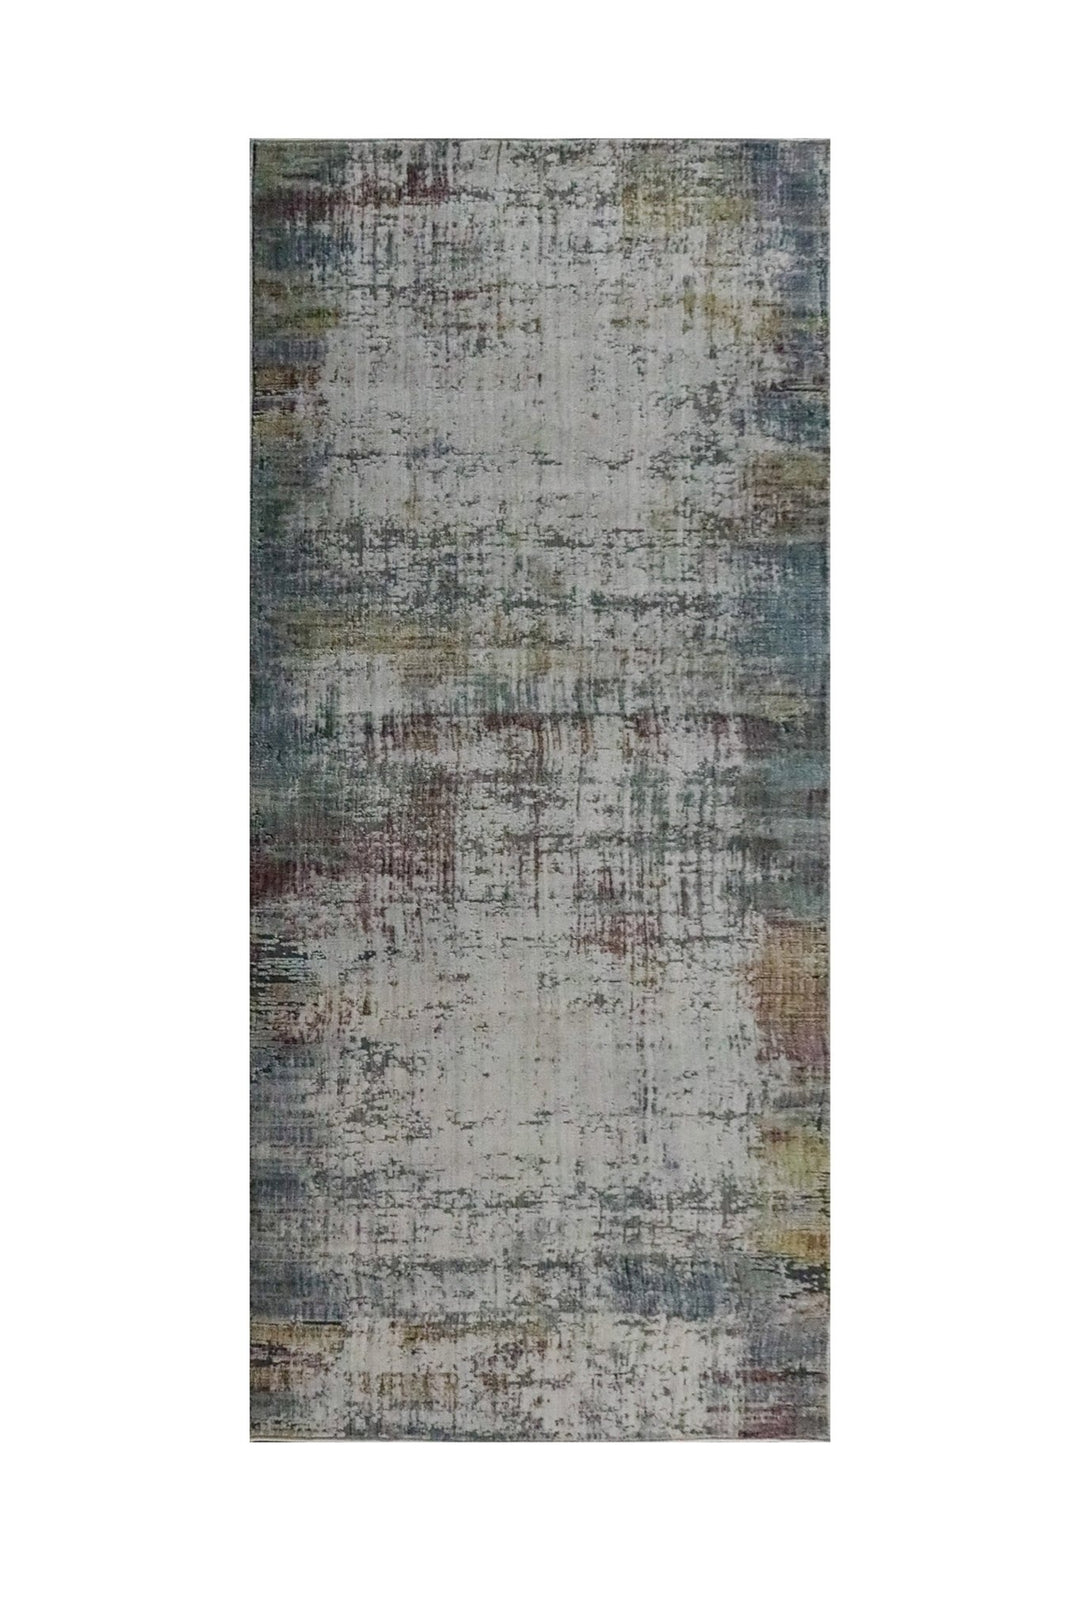 Turkish Modern Festival 1 Rug - 3.2 x 6.5 FT - Brown - Superior Comfort, Modern Style Accent Rugs - V Surfaces